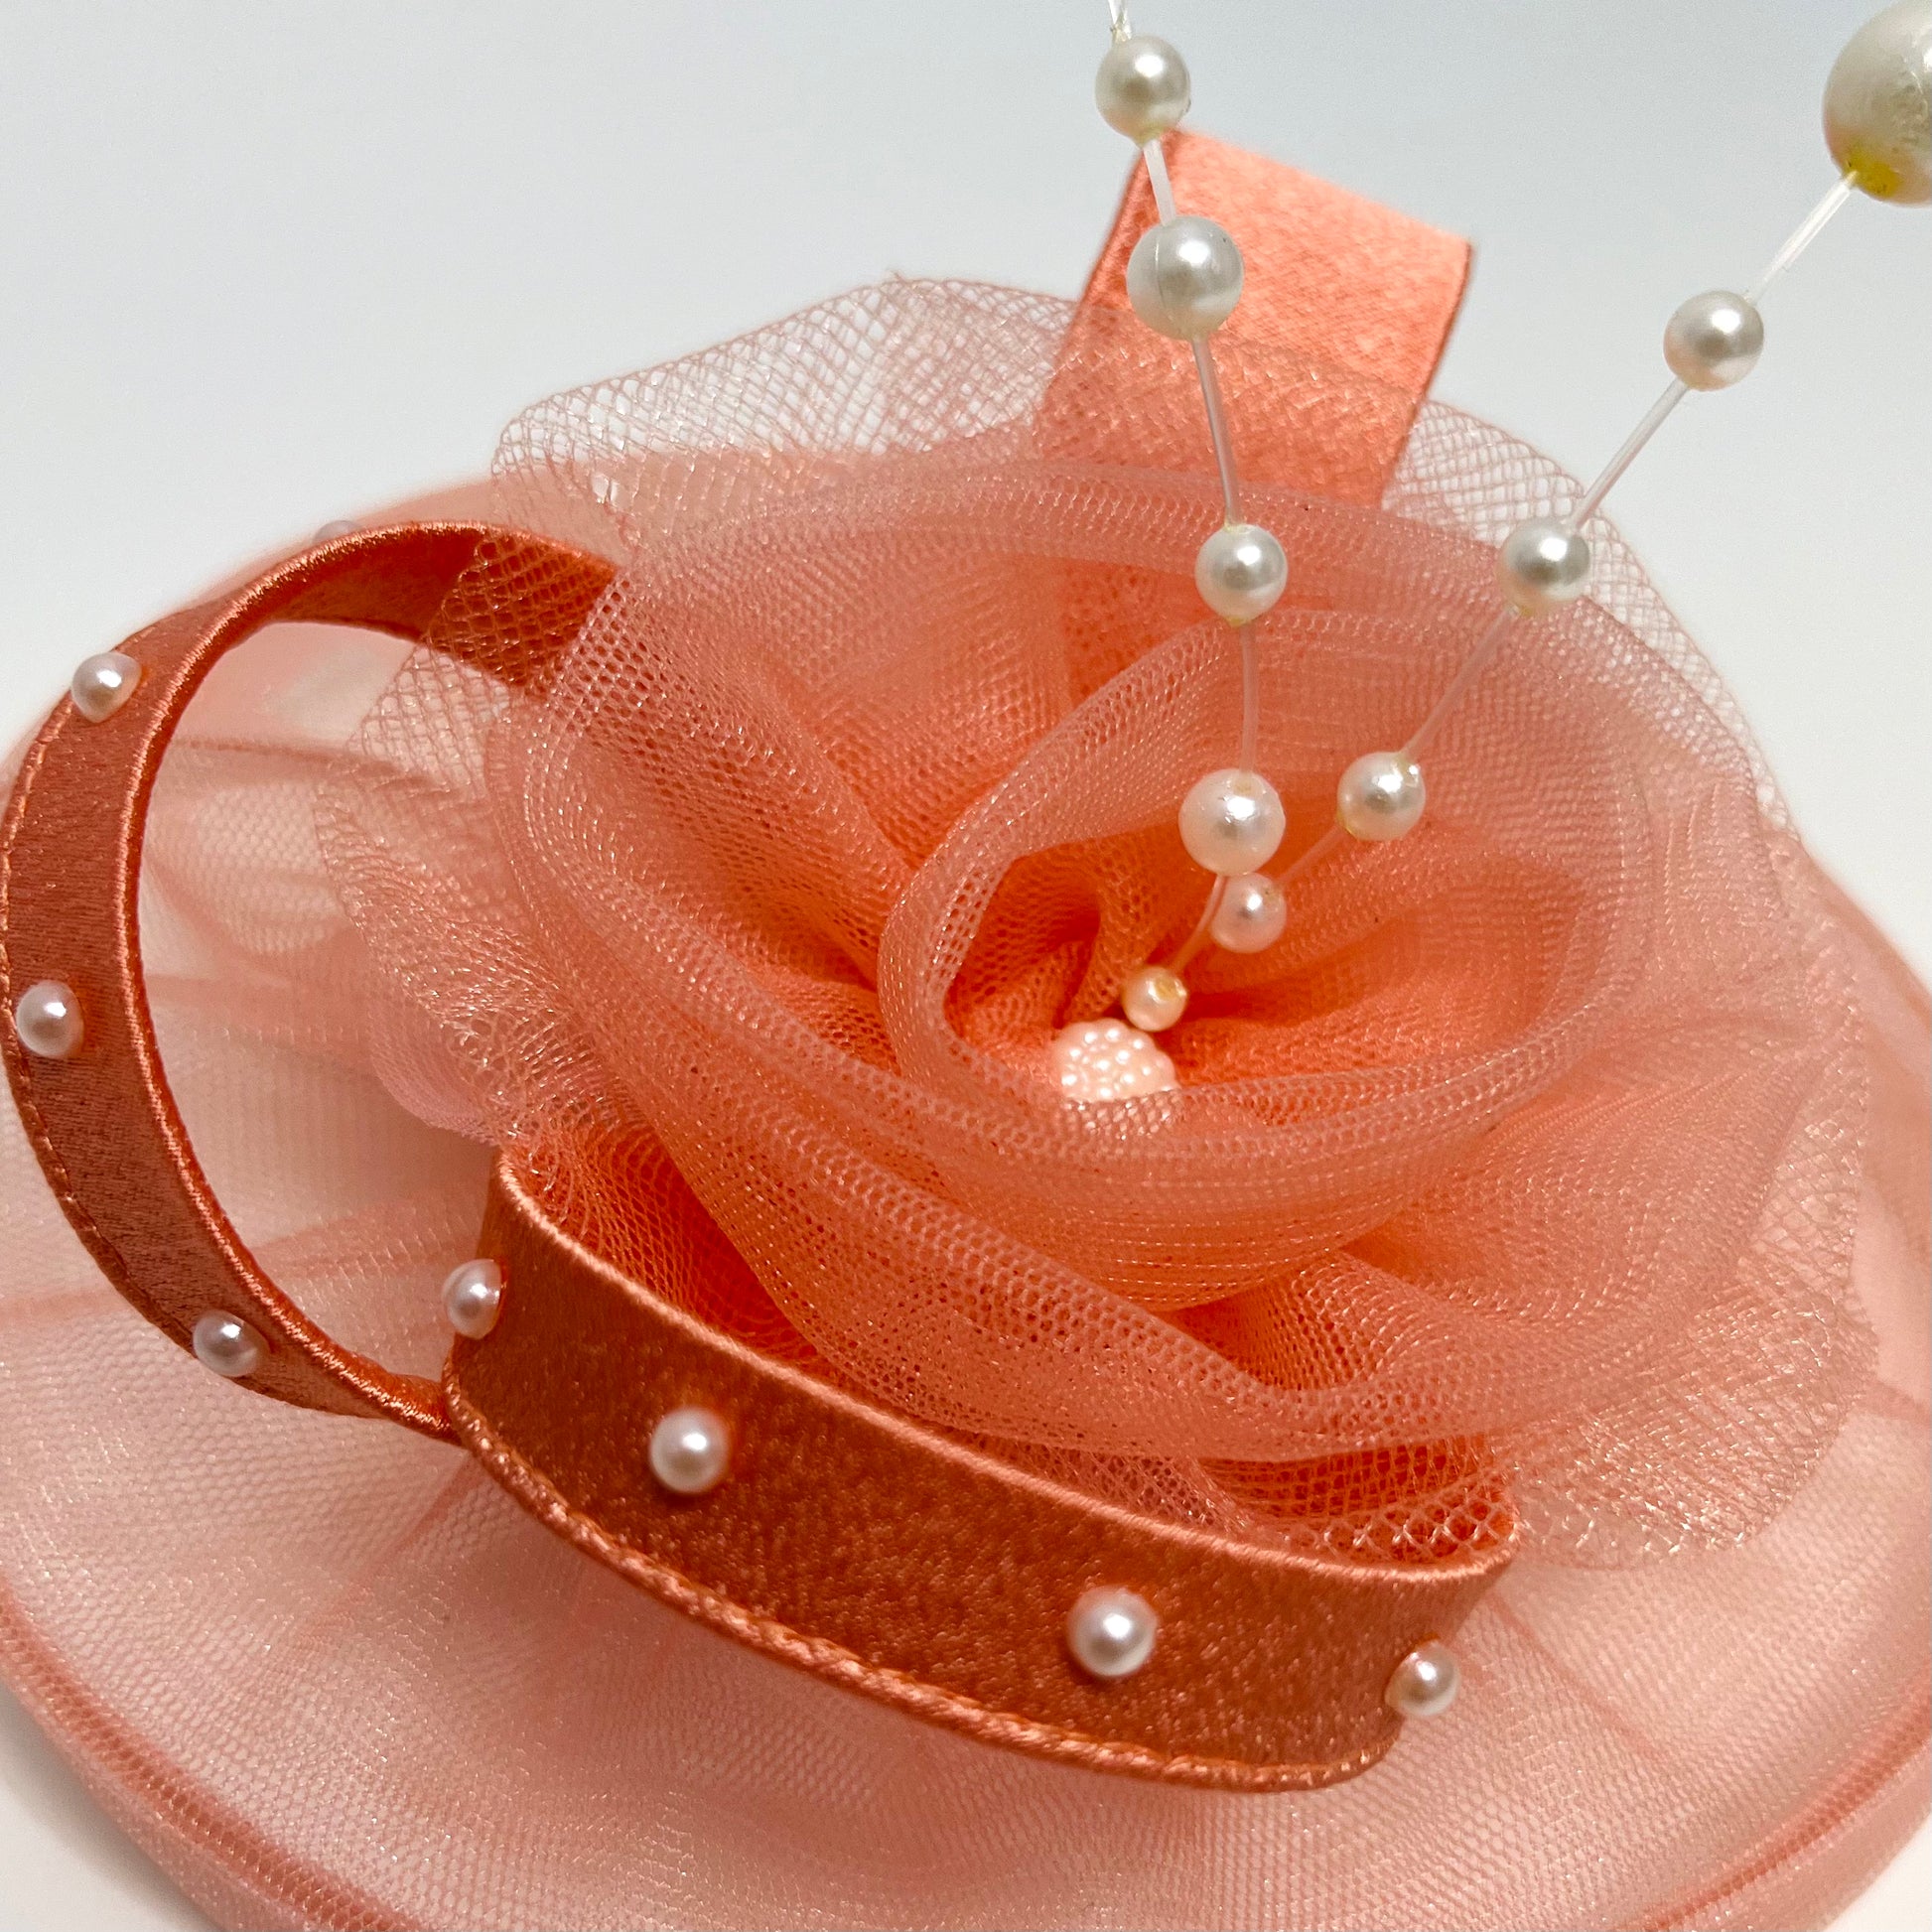 Peach Fascinator Hat wit pearls and ribbons | Birthday Accessories